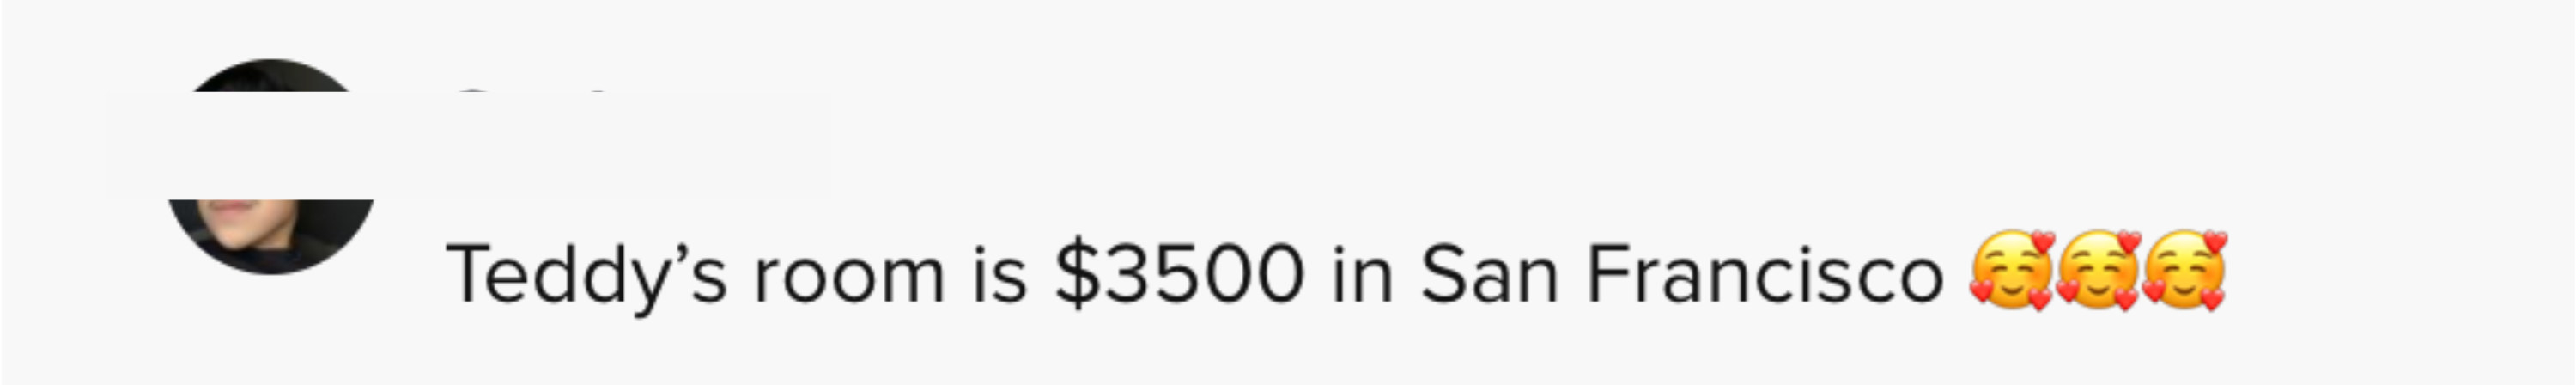 Another said &quot;Teddy&#x27;s room is $3500 in San Francisco [faces with hearts emojis]